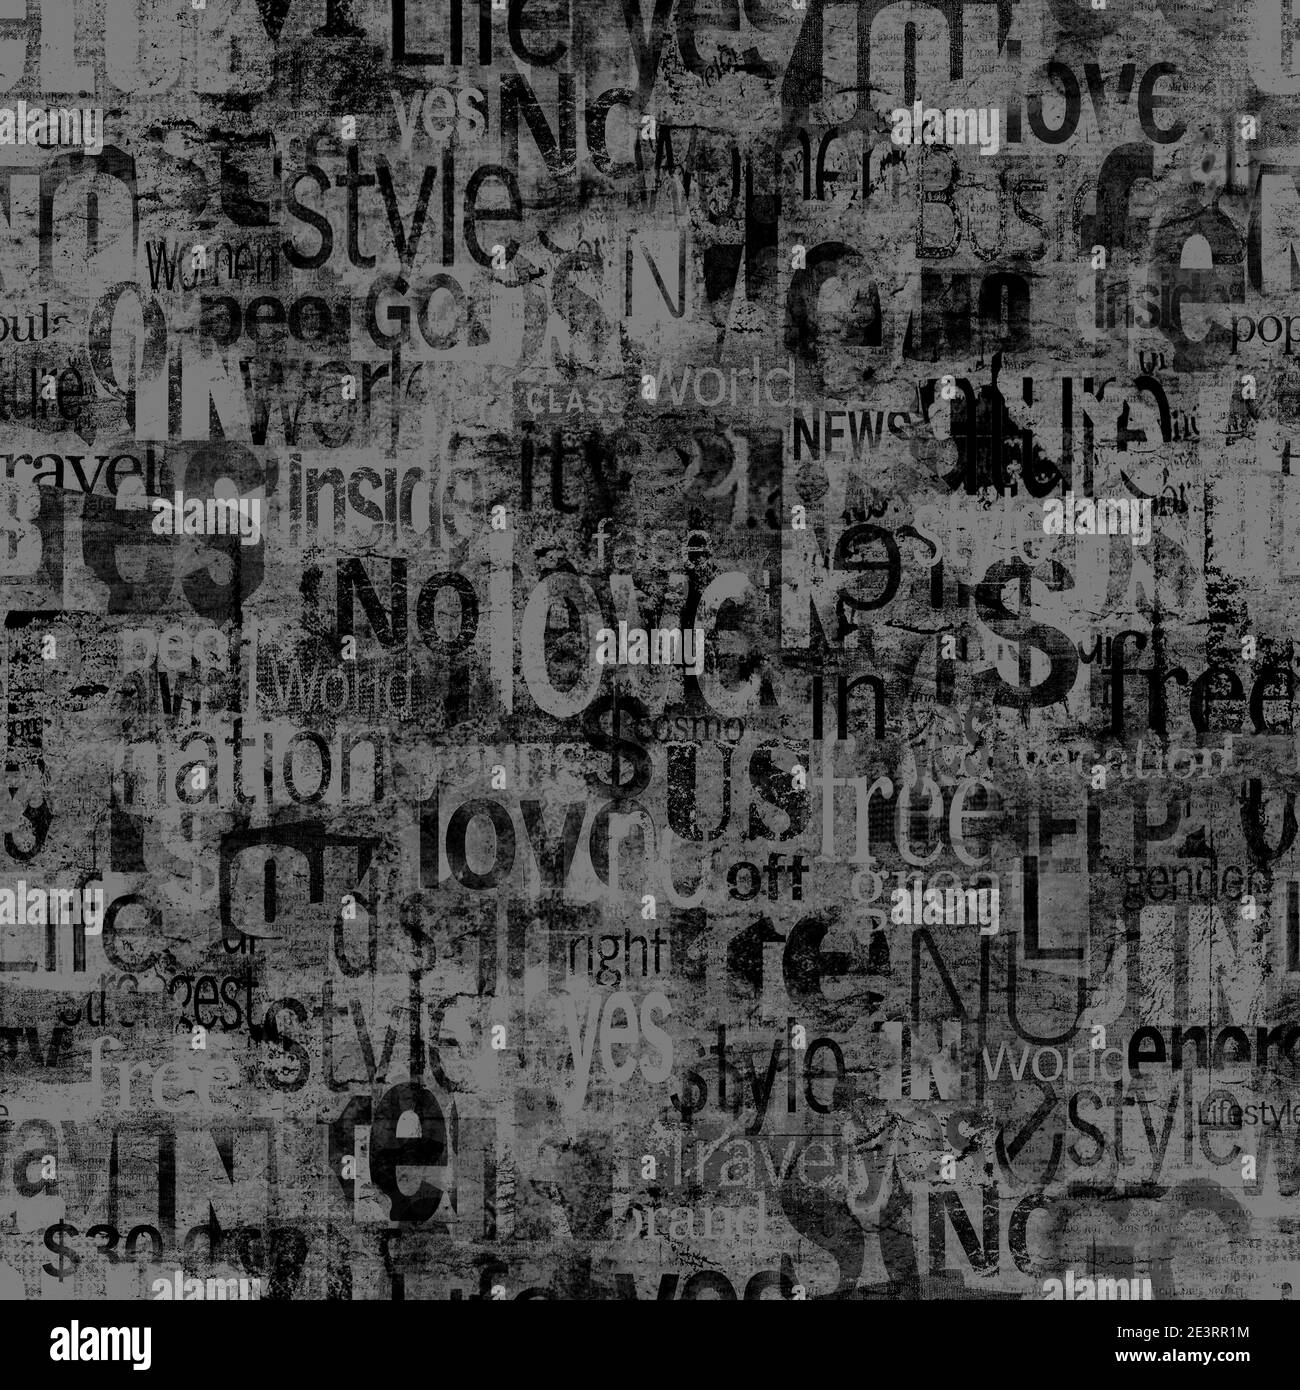 Abstract grunge urban geometric words, letters seamless pattern. Aged newspaper, magazine textured paper background. Black grey collage repeating text Stock Photo